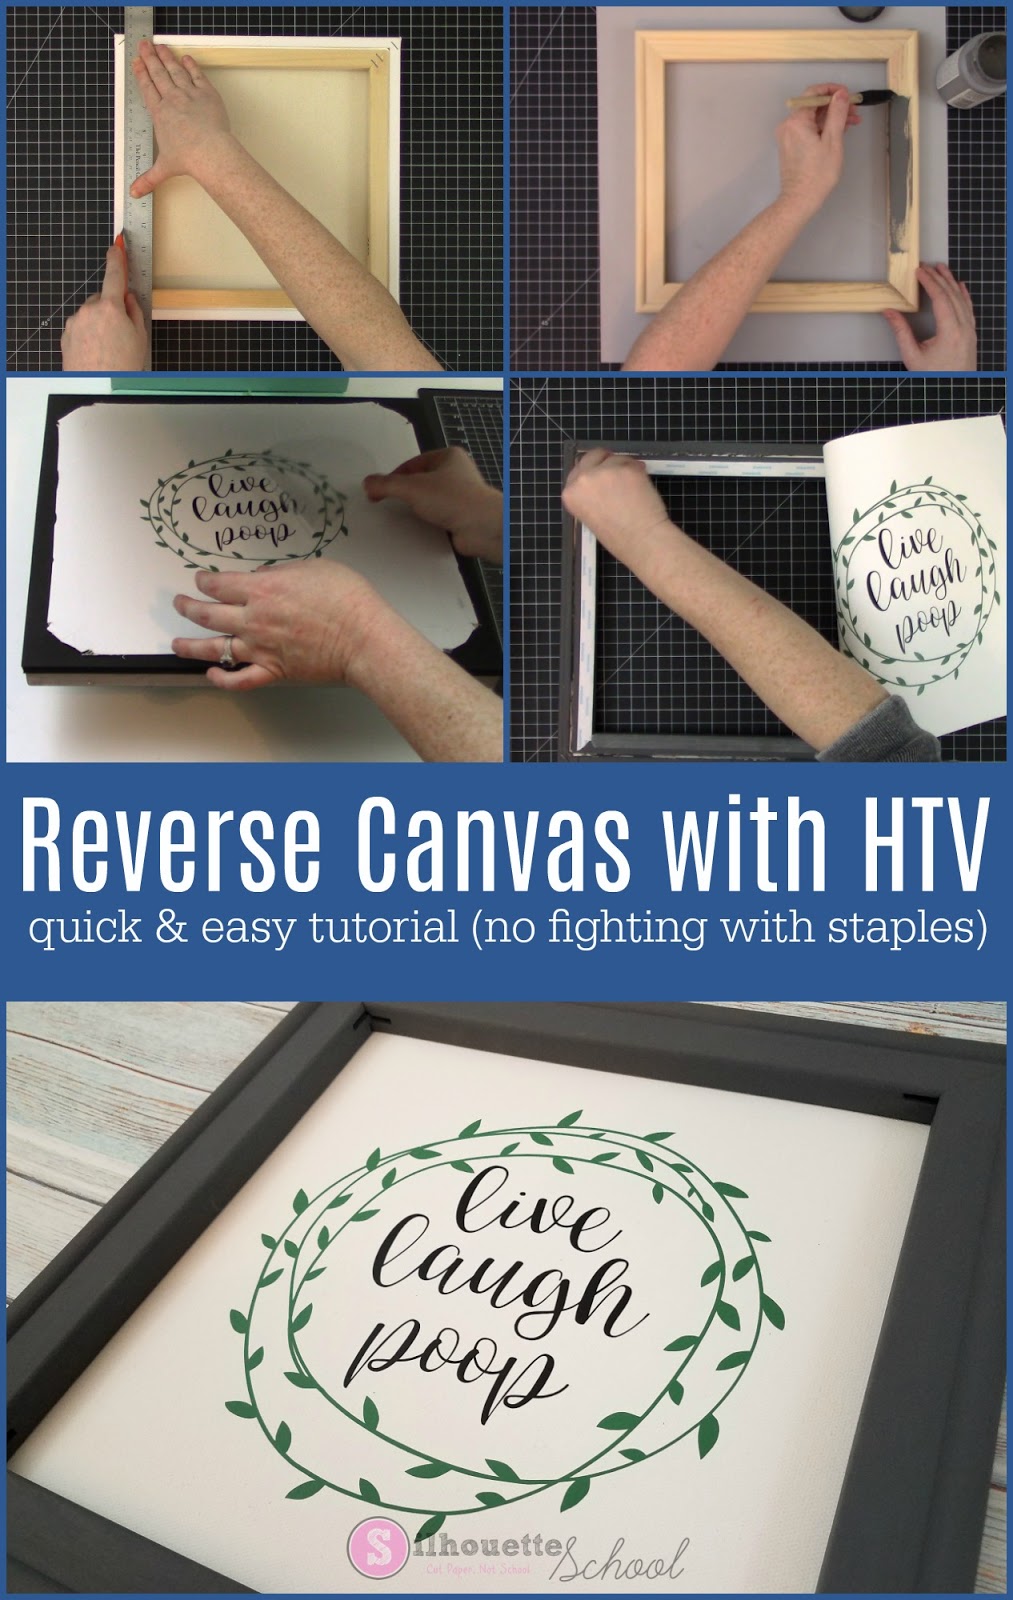 SUBLIMATION and REVERSE CANVAS How to Video Hacks in 2023